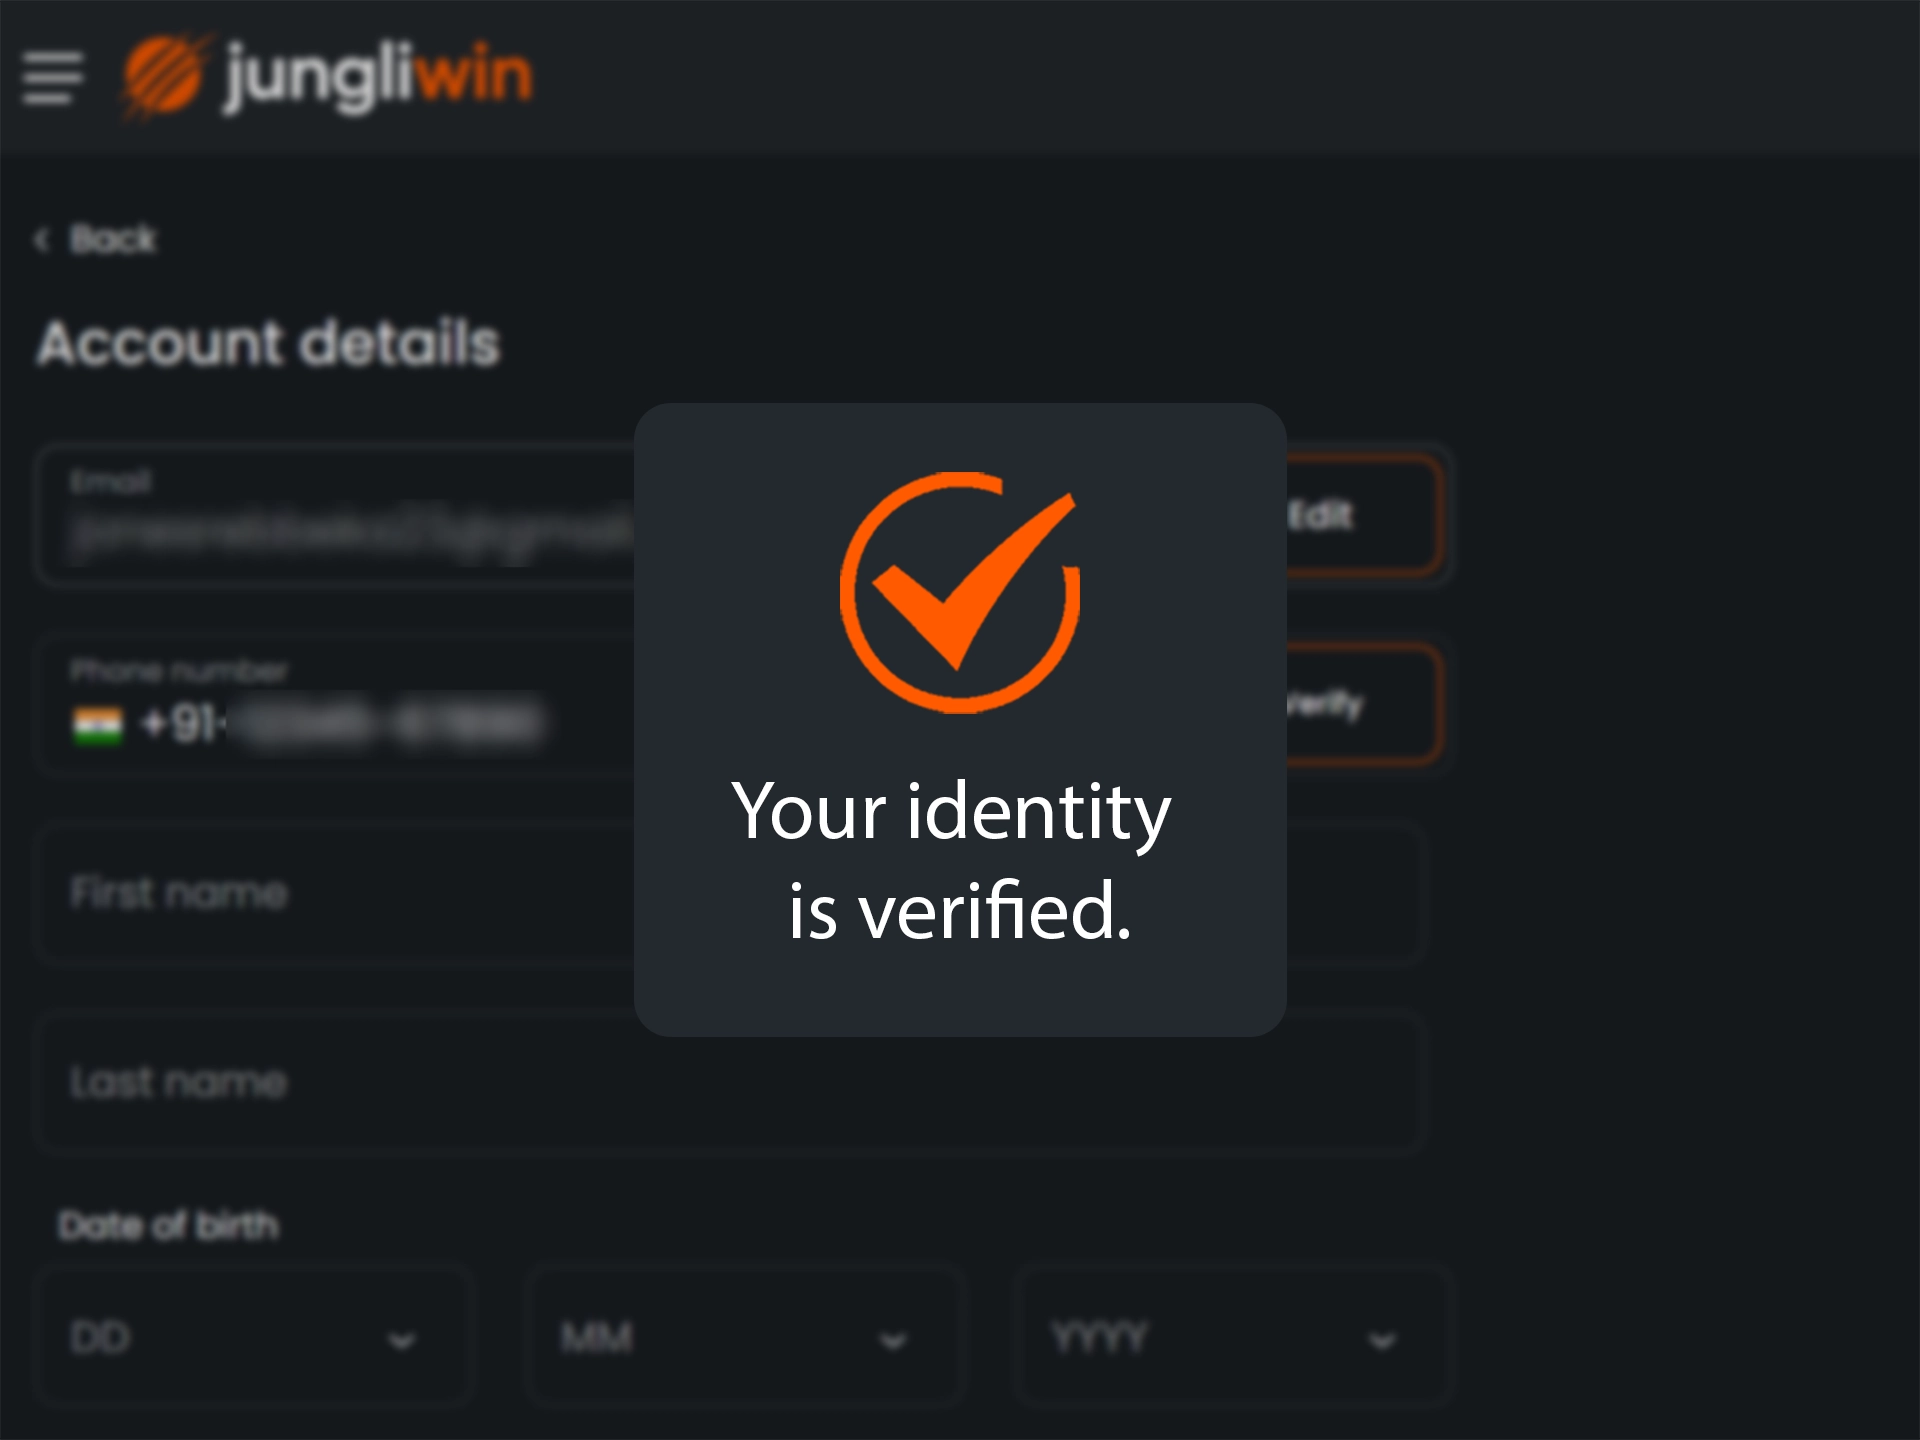 Provide JungliWin with proof of your identity to complete the verification process.